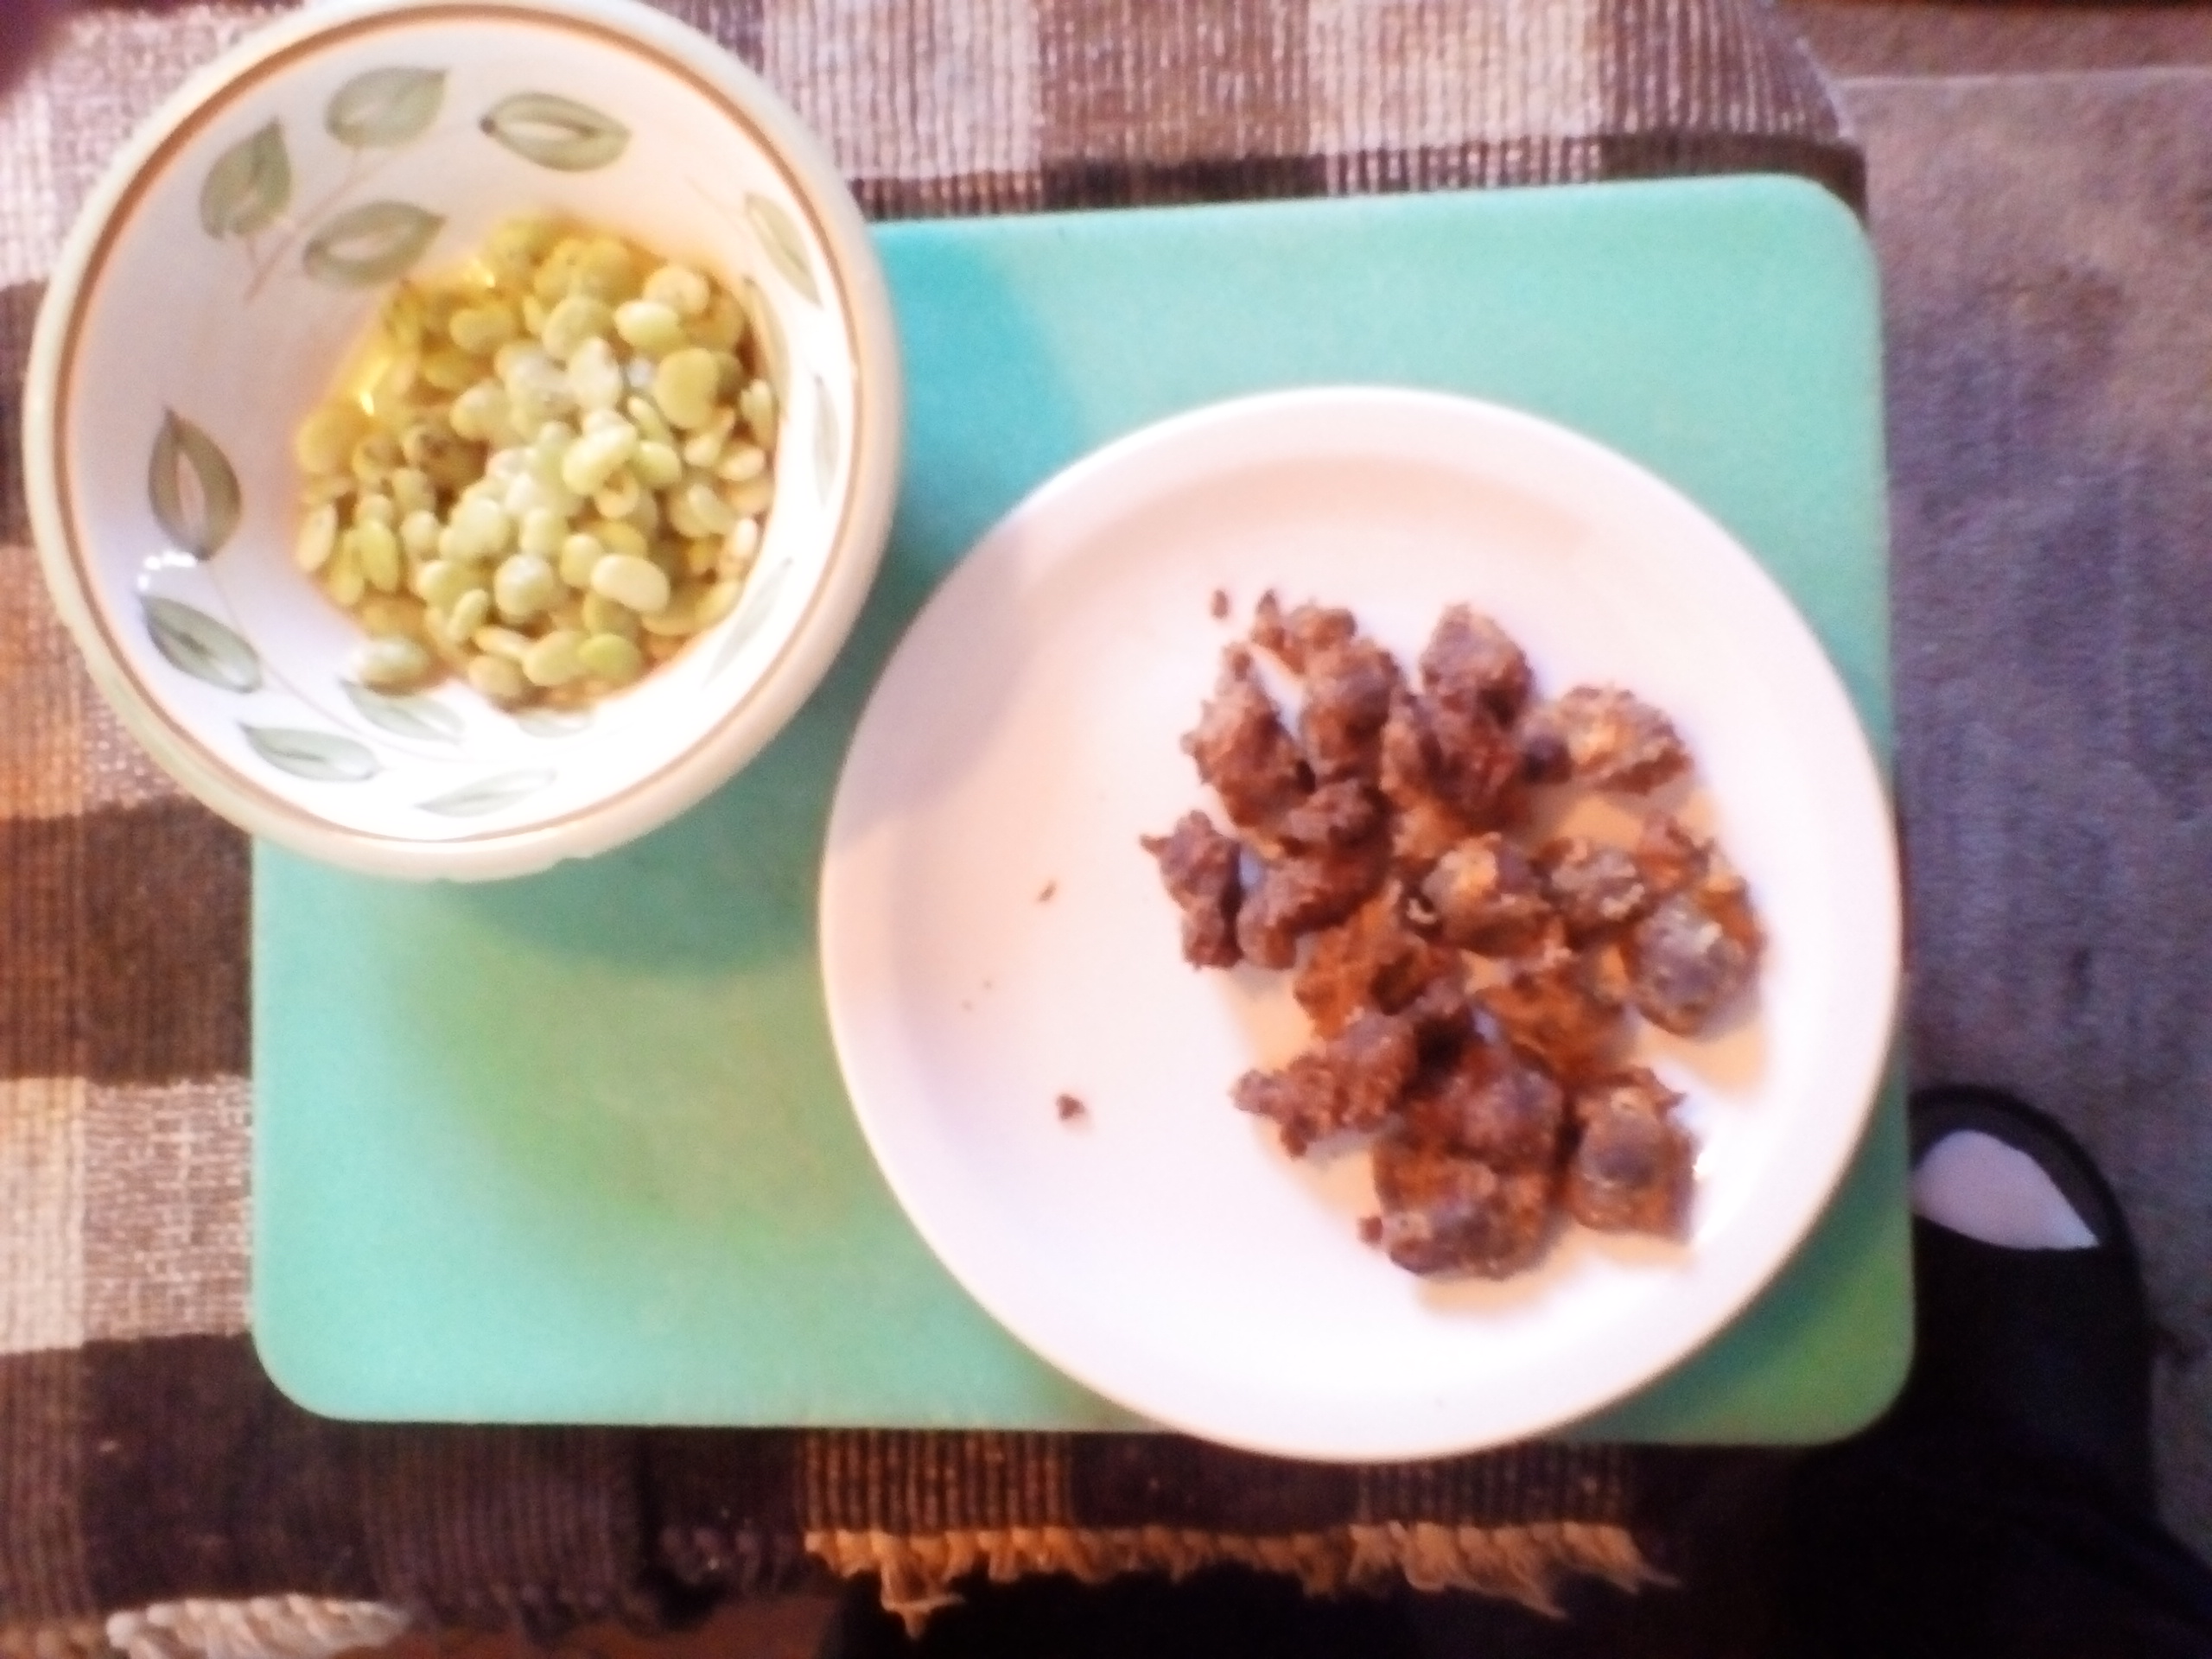 Southern Fried Chicken Gizzards Recipe | Allrecipes